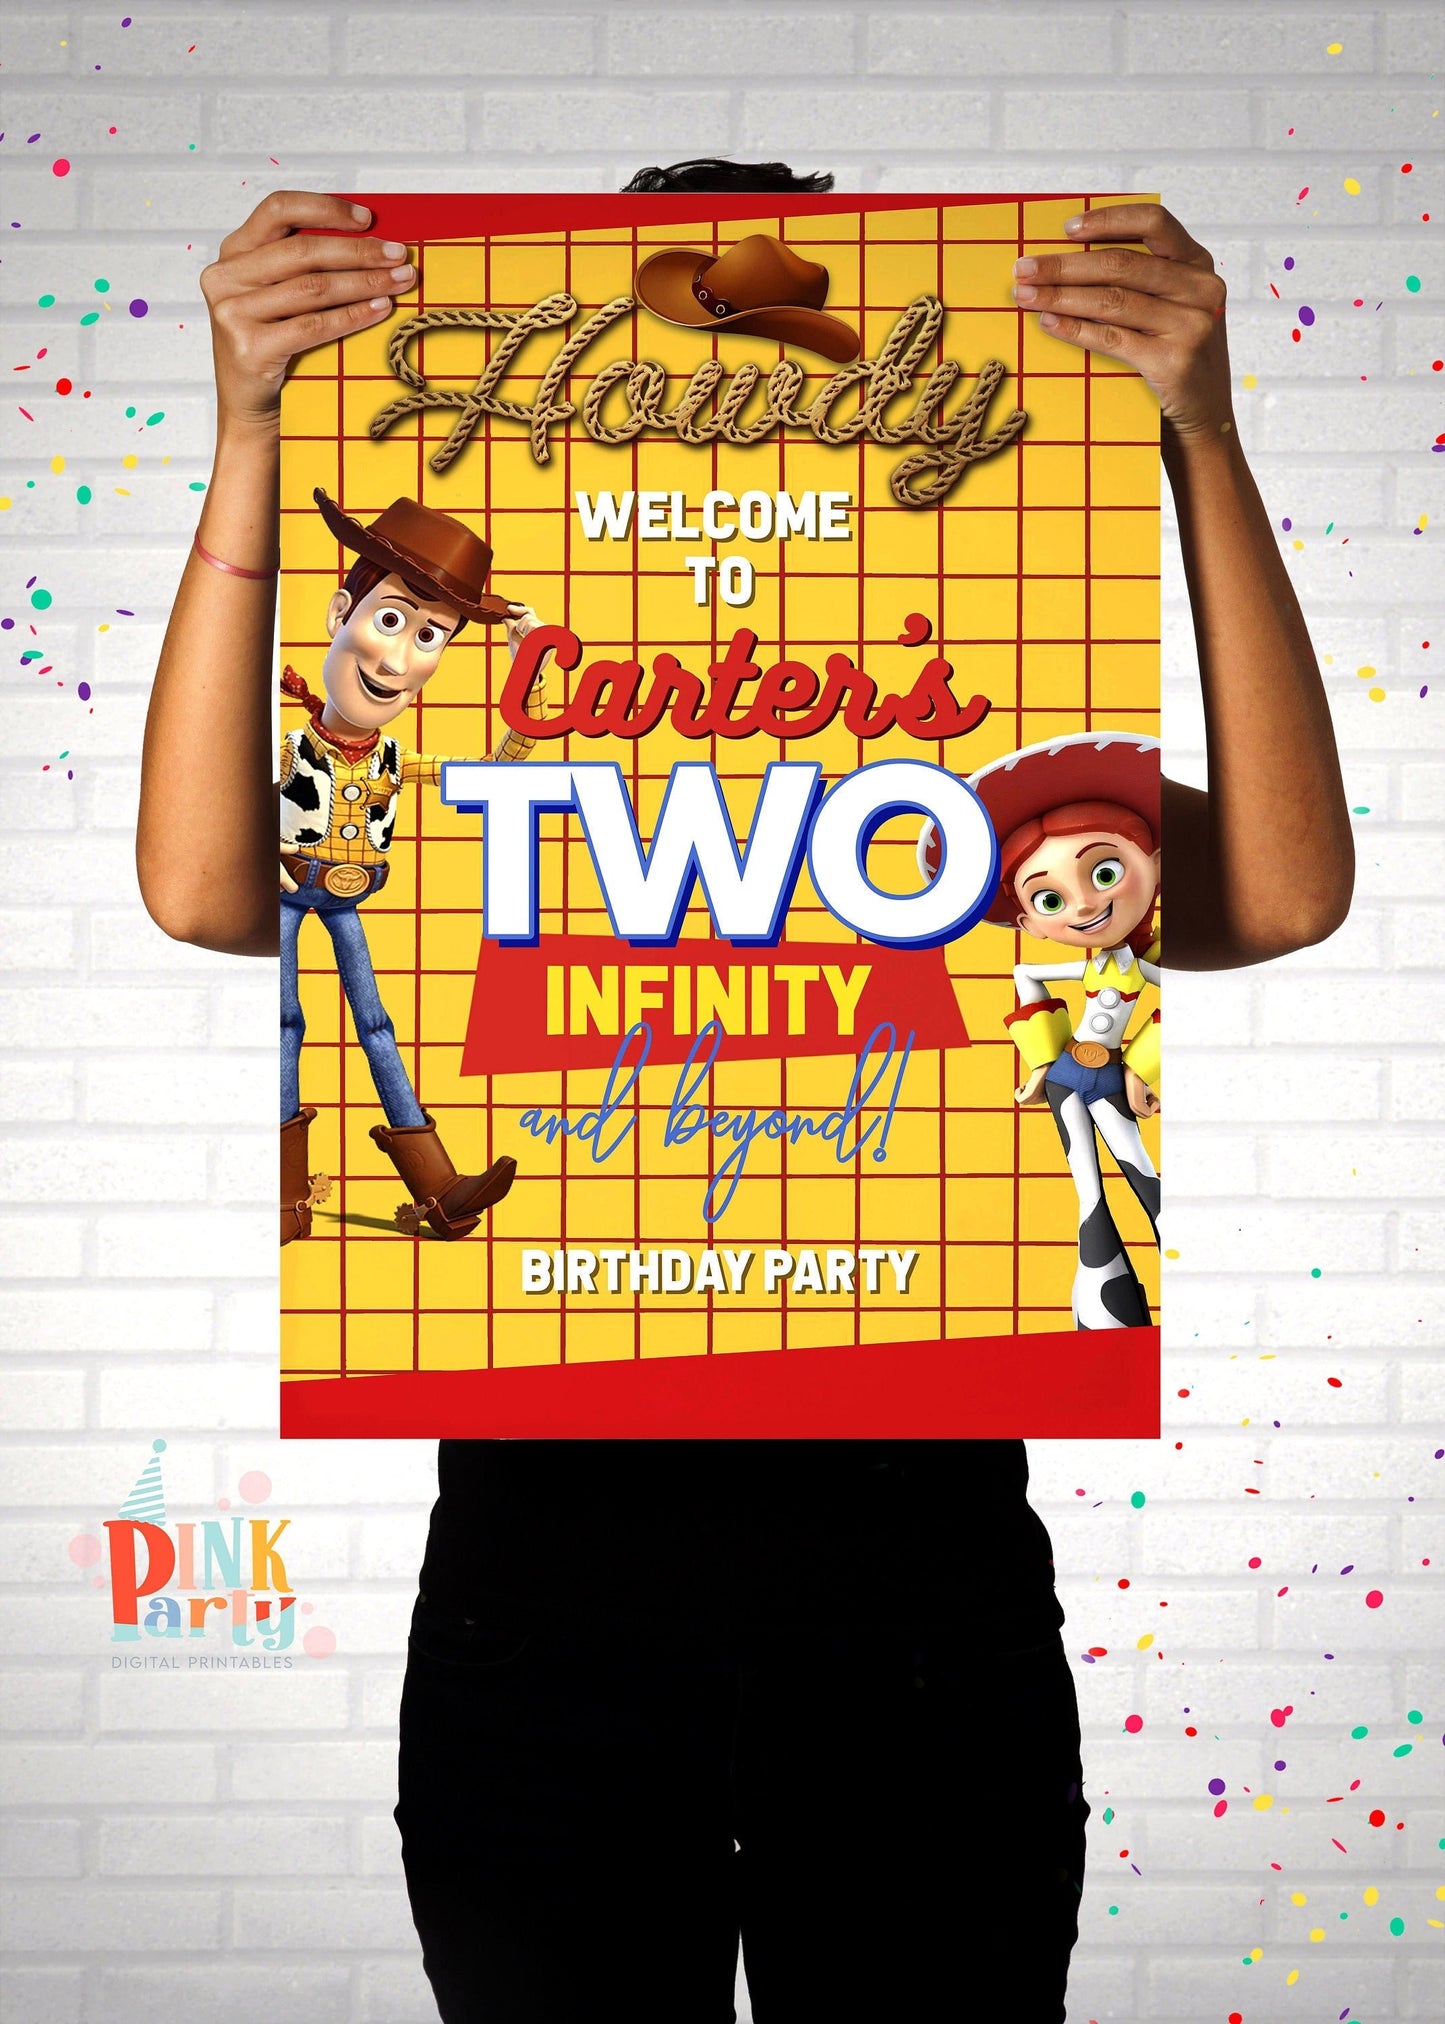 TOY STORY WOODY WELCOME SIGN EDITABLE TEMPLATE